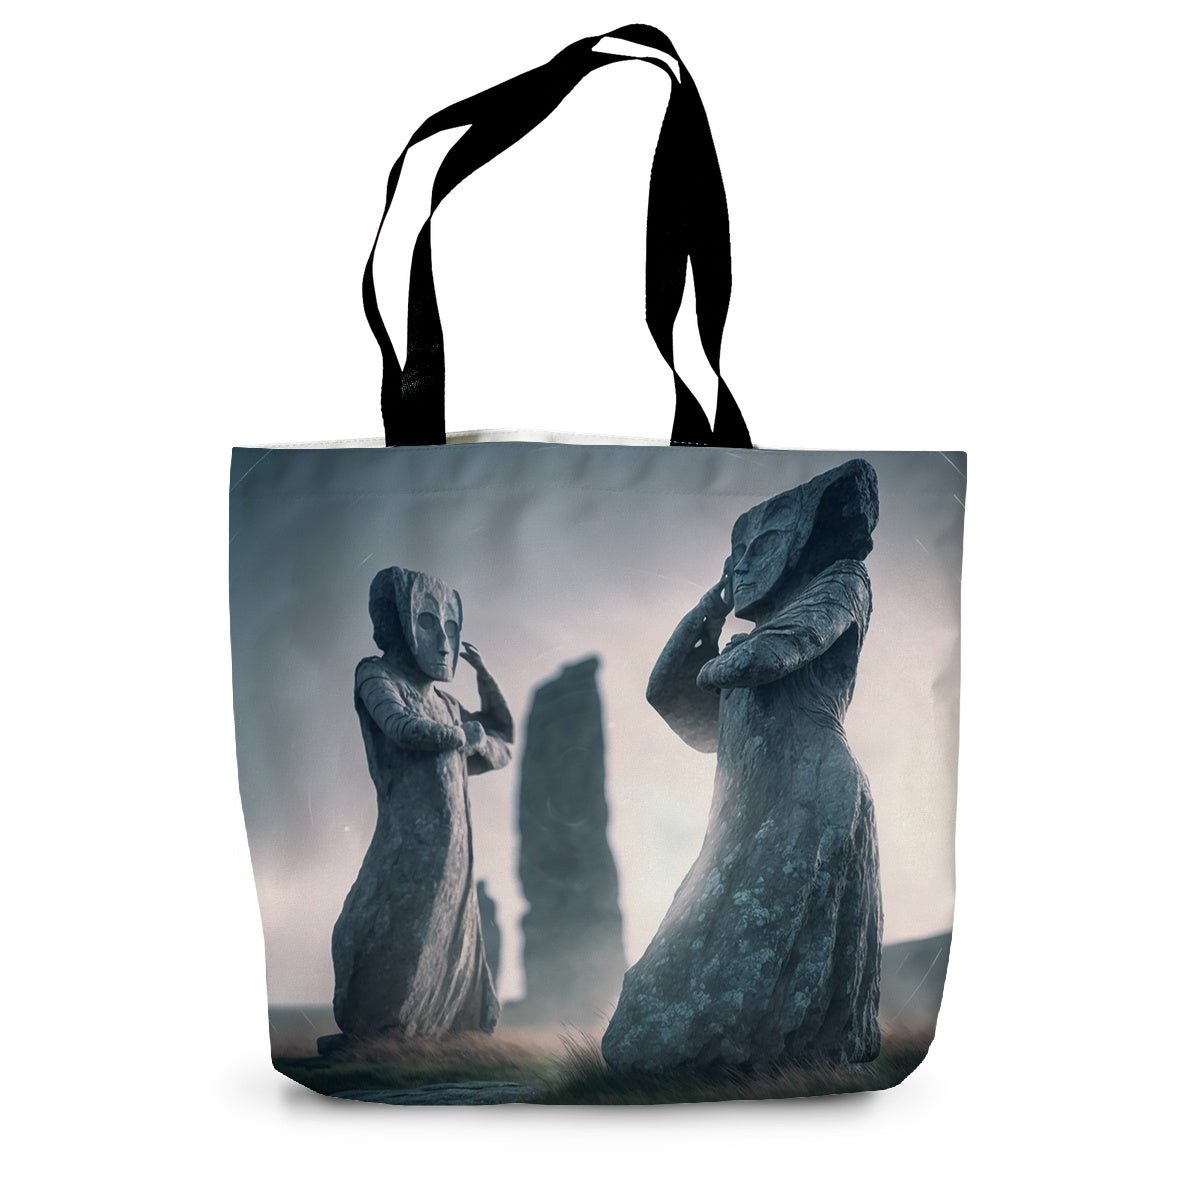 The thinkers Canvas Tote Bag